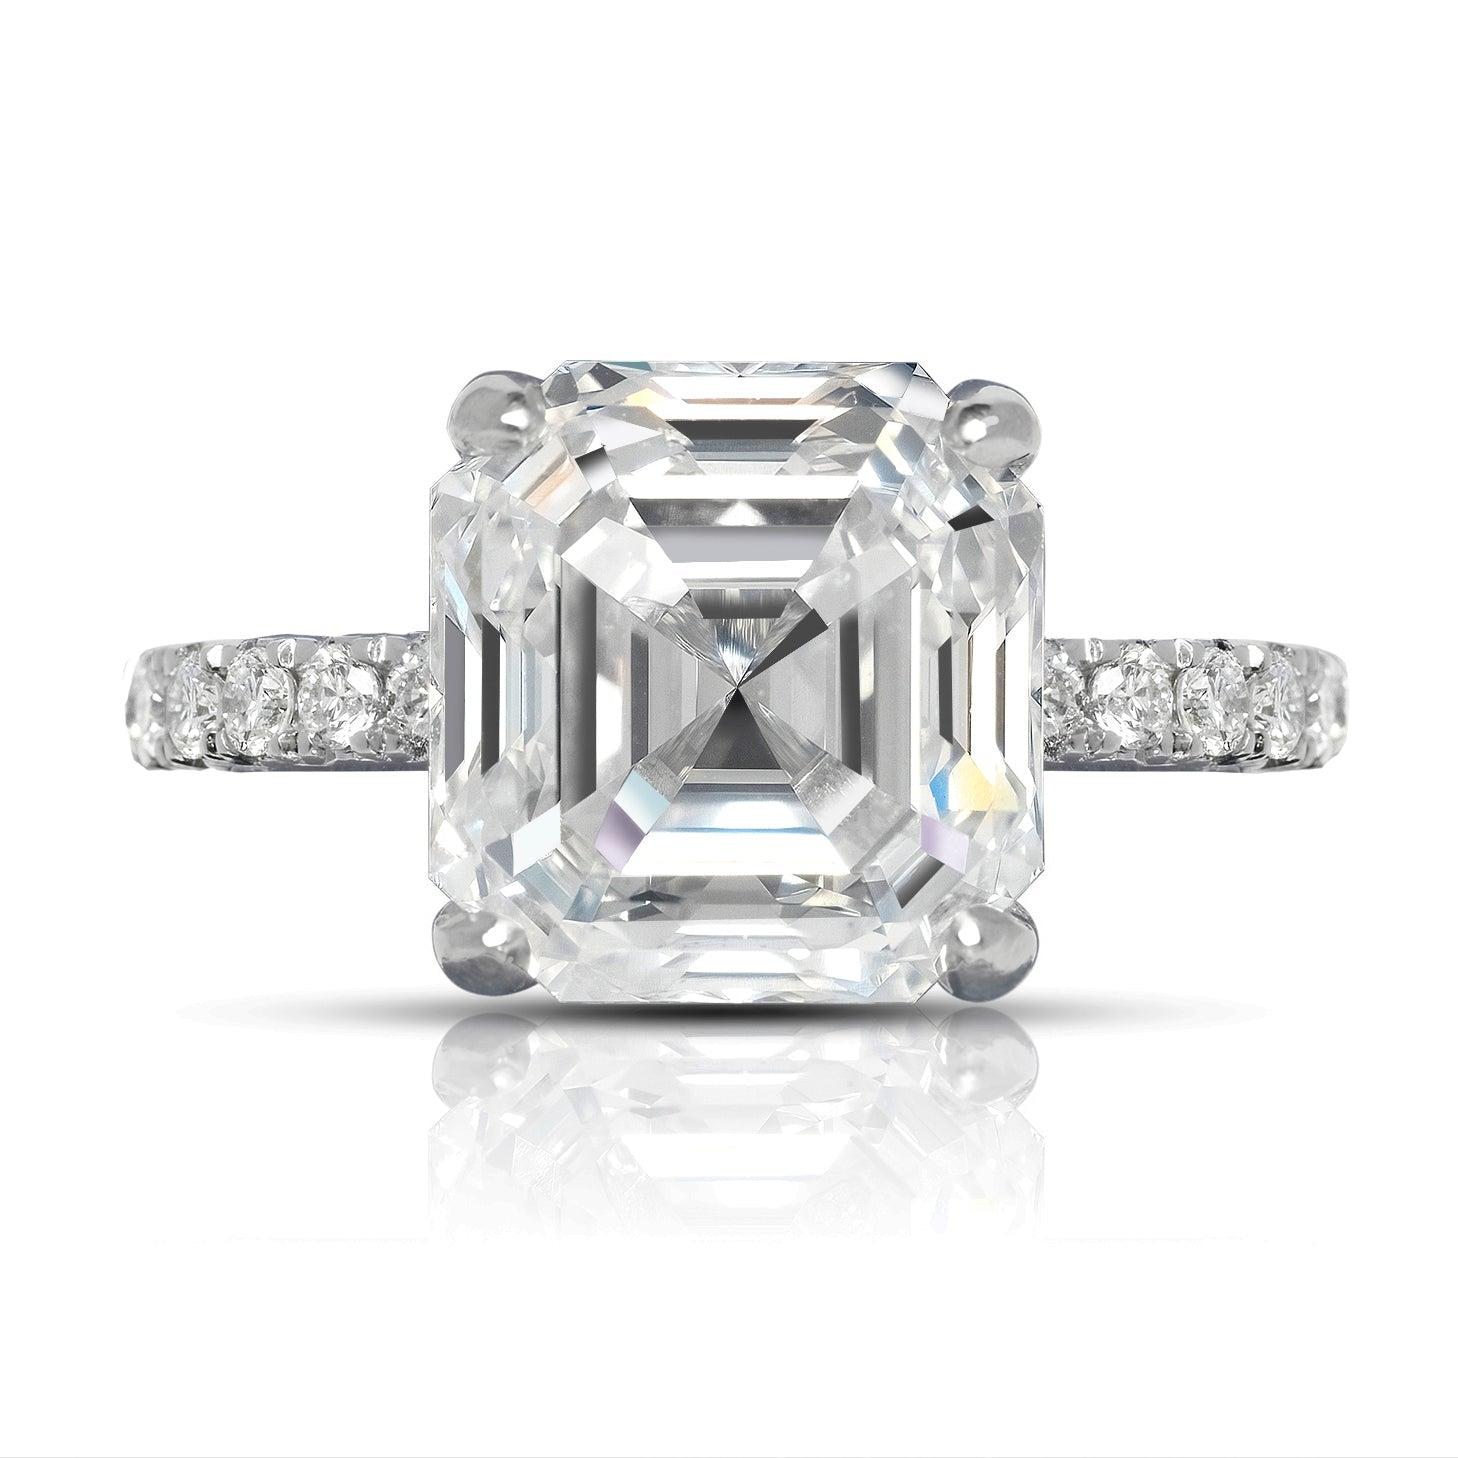 ADDISON DIAMOND ENGAGEMENT PLATINUM RING BY MIKE NEKTA
GIA CERTIFIED

Center Diamond:
Carat Weight: 6.2 Carats
Color: G*
Clarity: VVS1
Style:  ASSCHER CUT/ EMERALD- SQUARE MODIFIED BRILLIANT
Approximate Measurements: 10.4 x 9.9 x 6.7 mm
* This